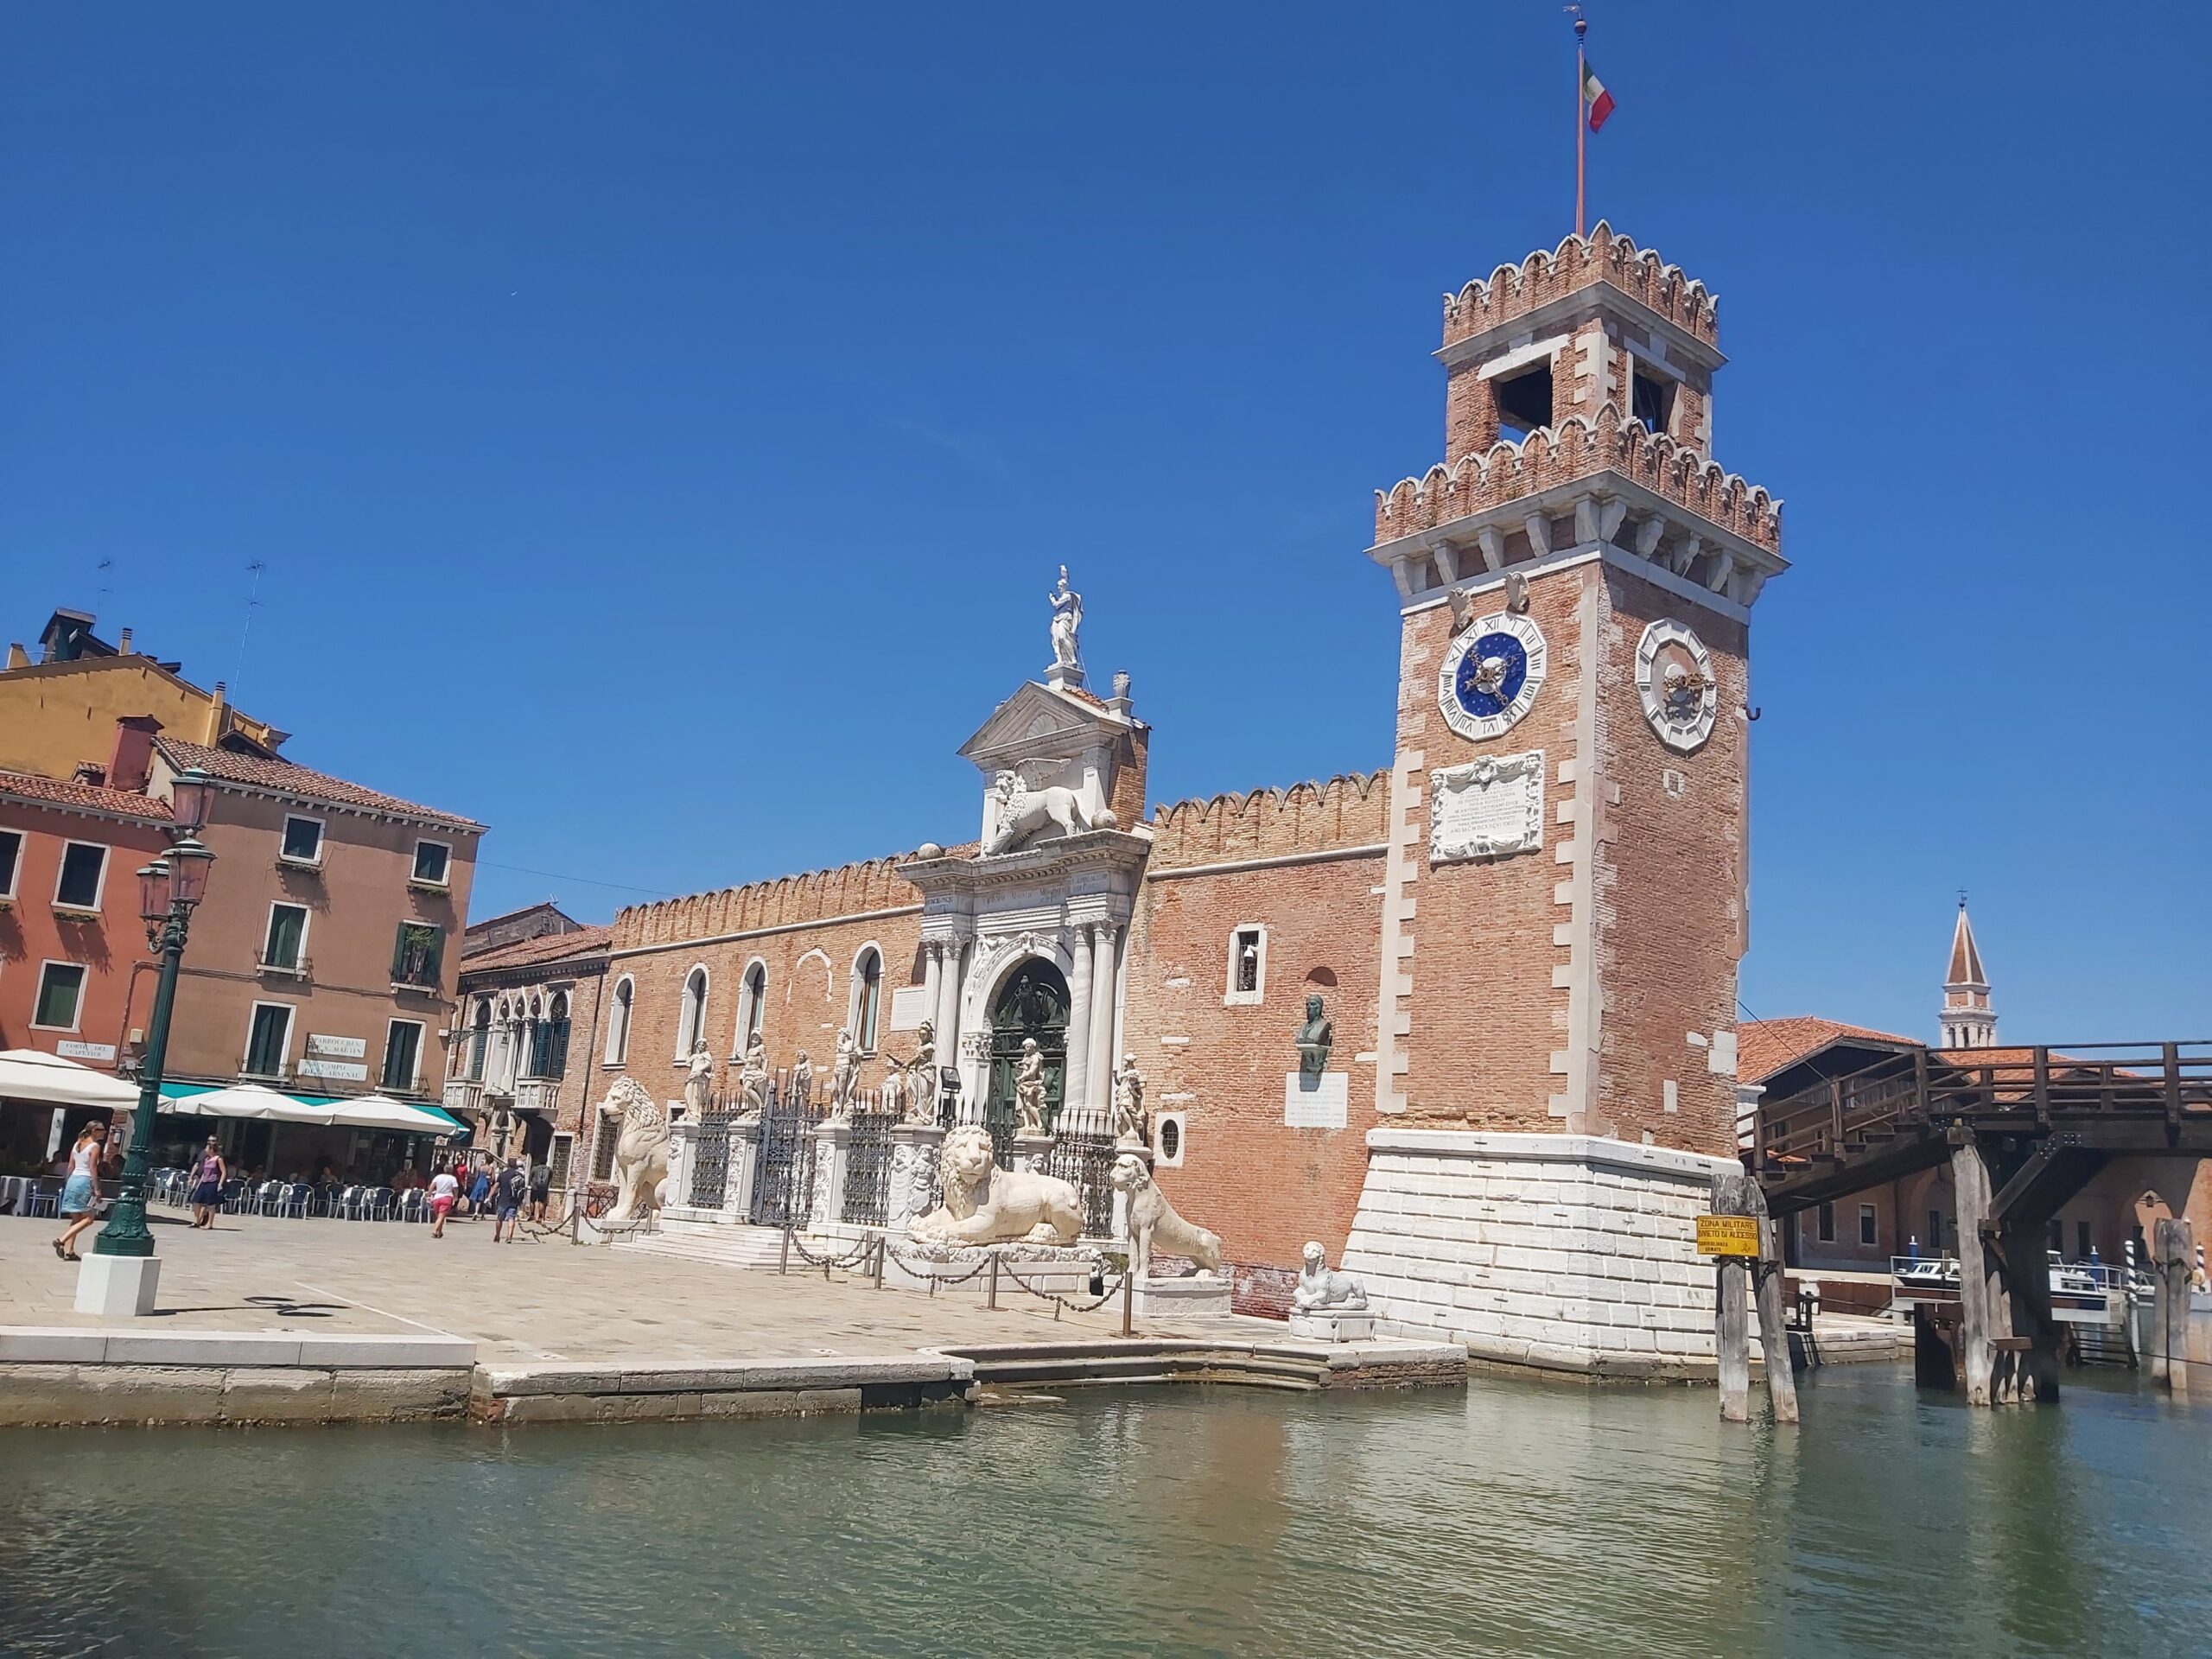 The entrance to The Venetian Arsenal and its statues of lions in Venice, Italy